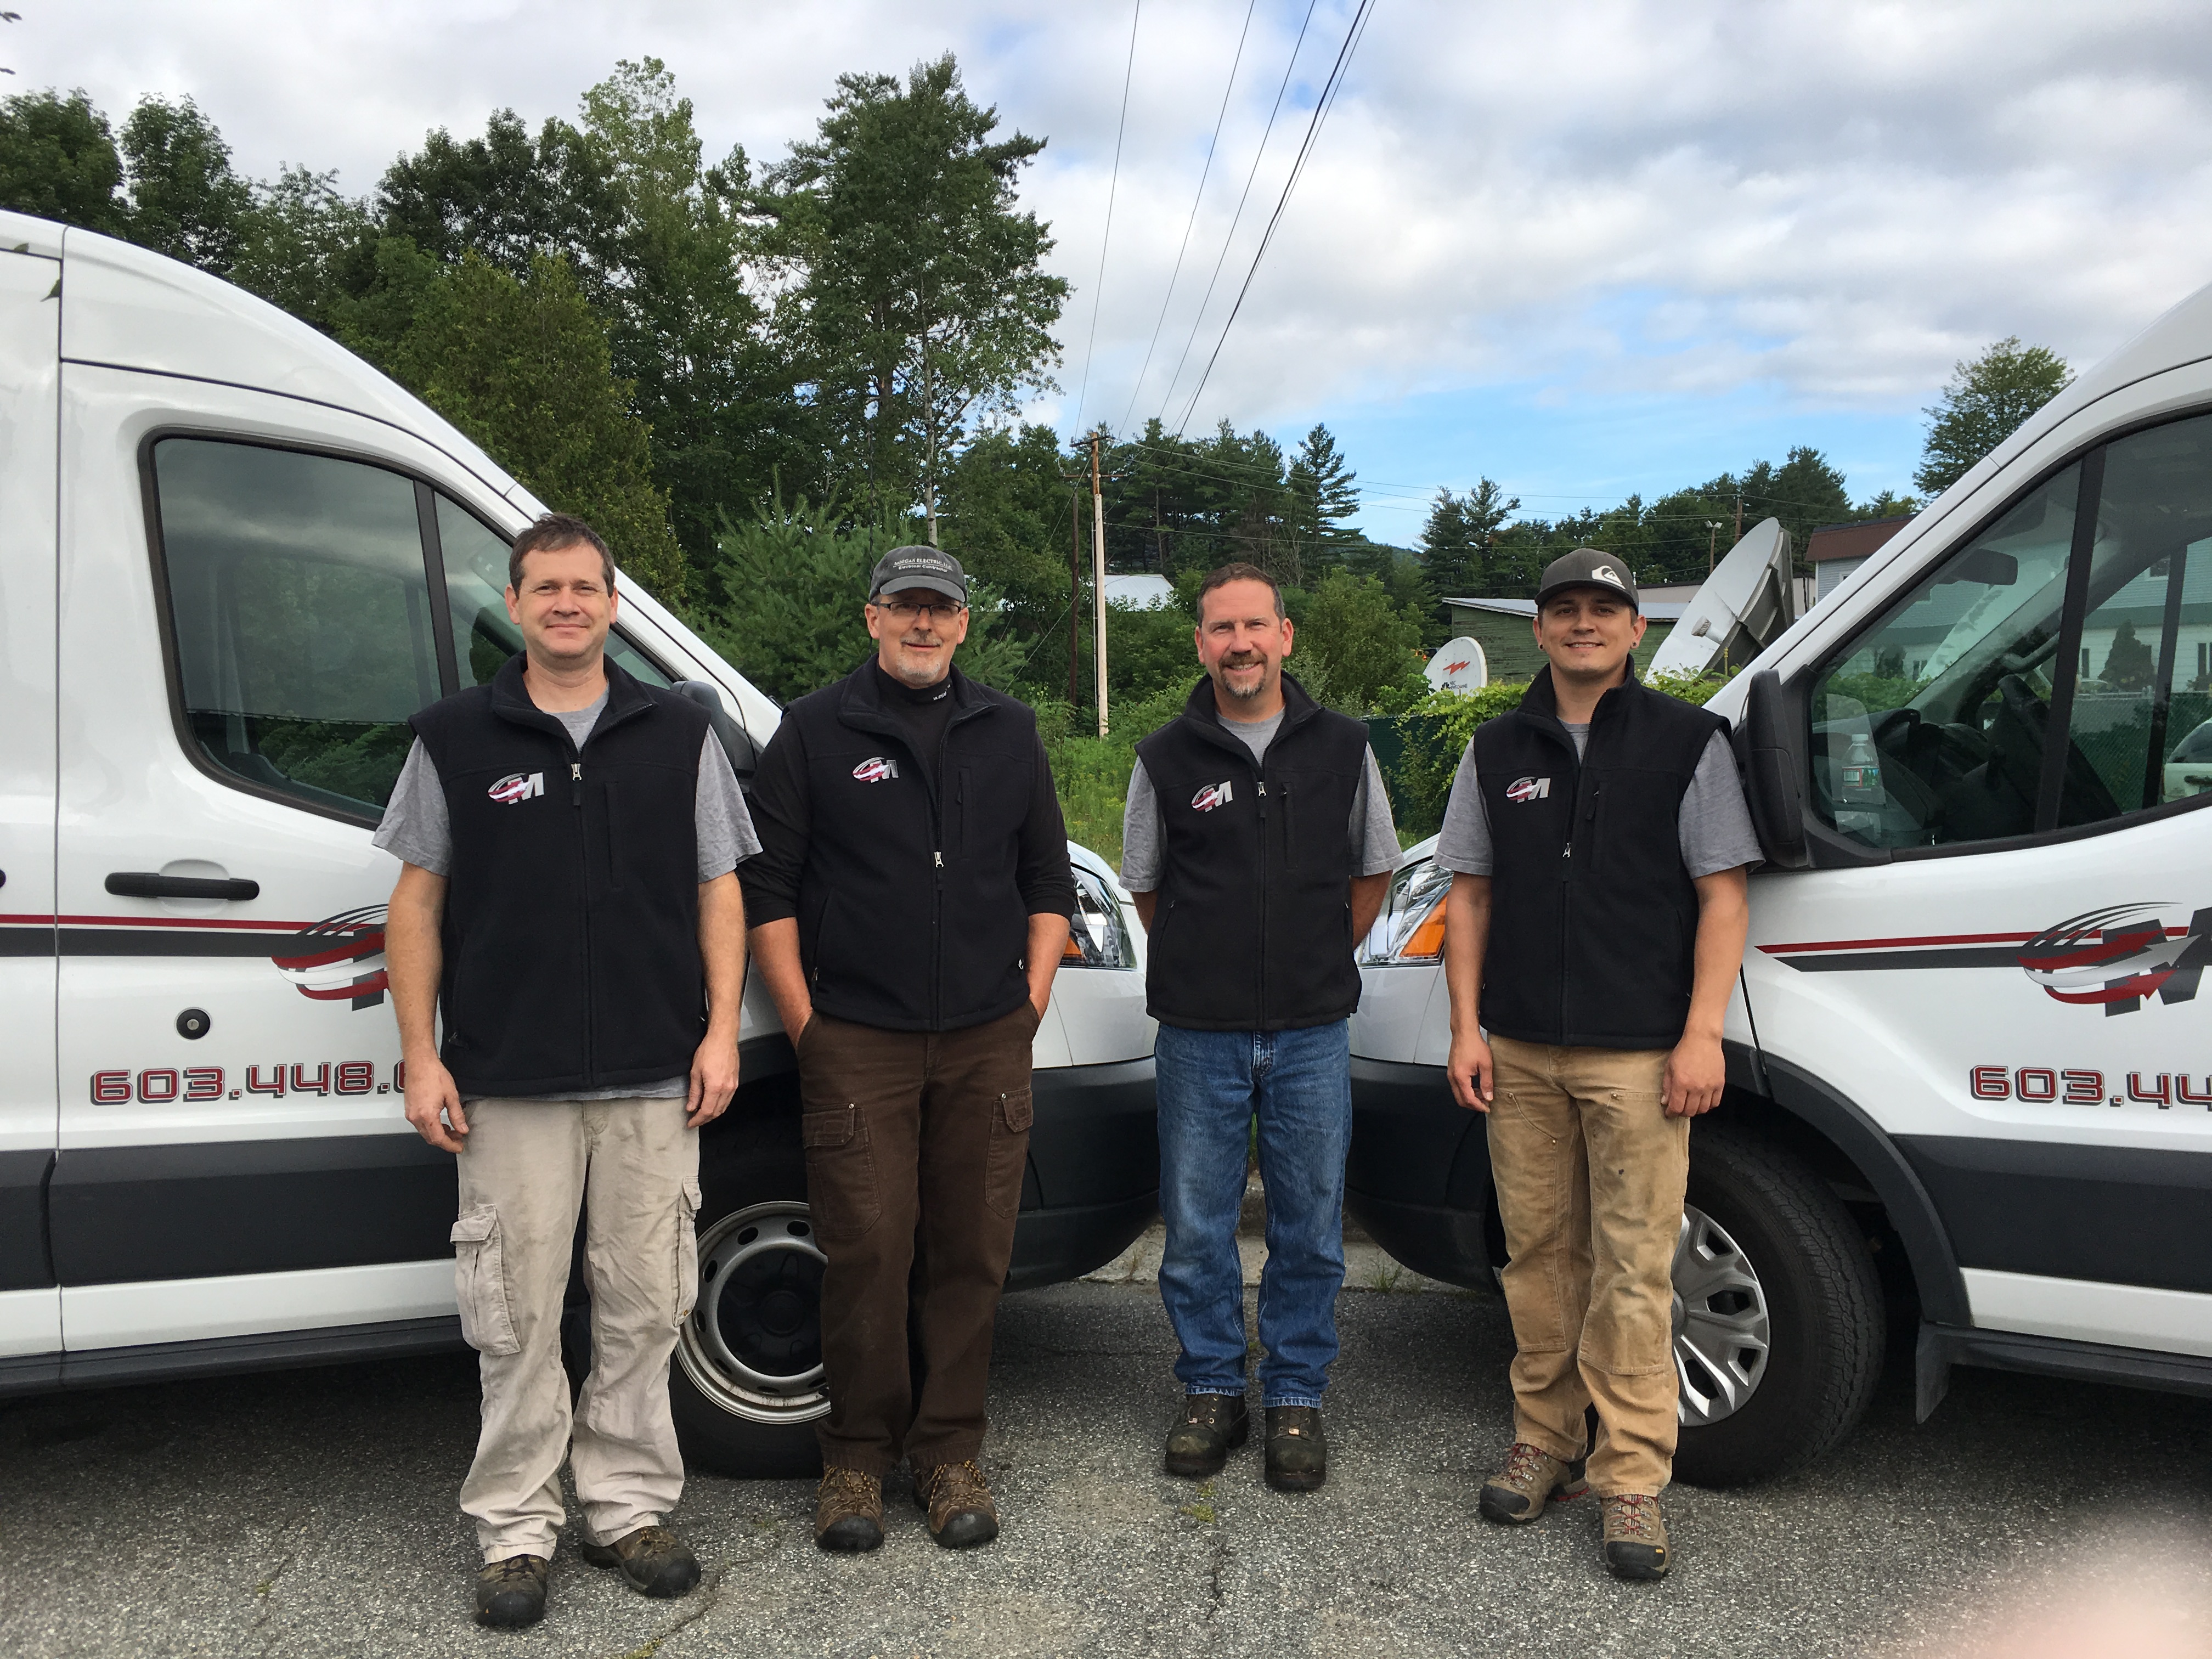 Morgan Electric, LLC has delivered professional workmanship, unmatched customer service, and outstanding value to the residential, commercial, and industrial custome﻿rs around the Upper Valley, Vermont and New Hampshire since 2004.
•New home electrical and renovations
•Fire alarm systems
•Back-up generators
•Tel/Data wiring
•Lighting upgrades
•LED retrofit
•Diagnostics and troubleshooting